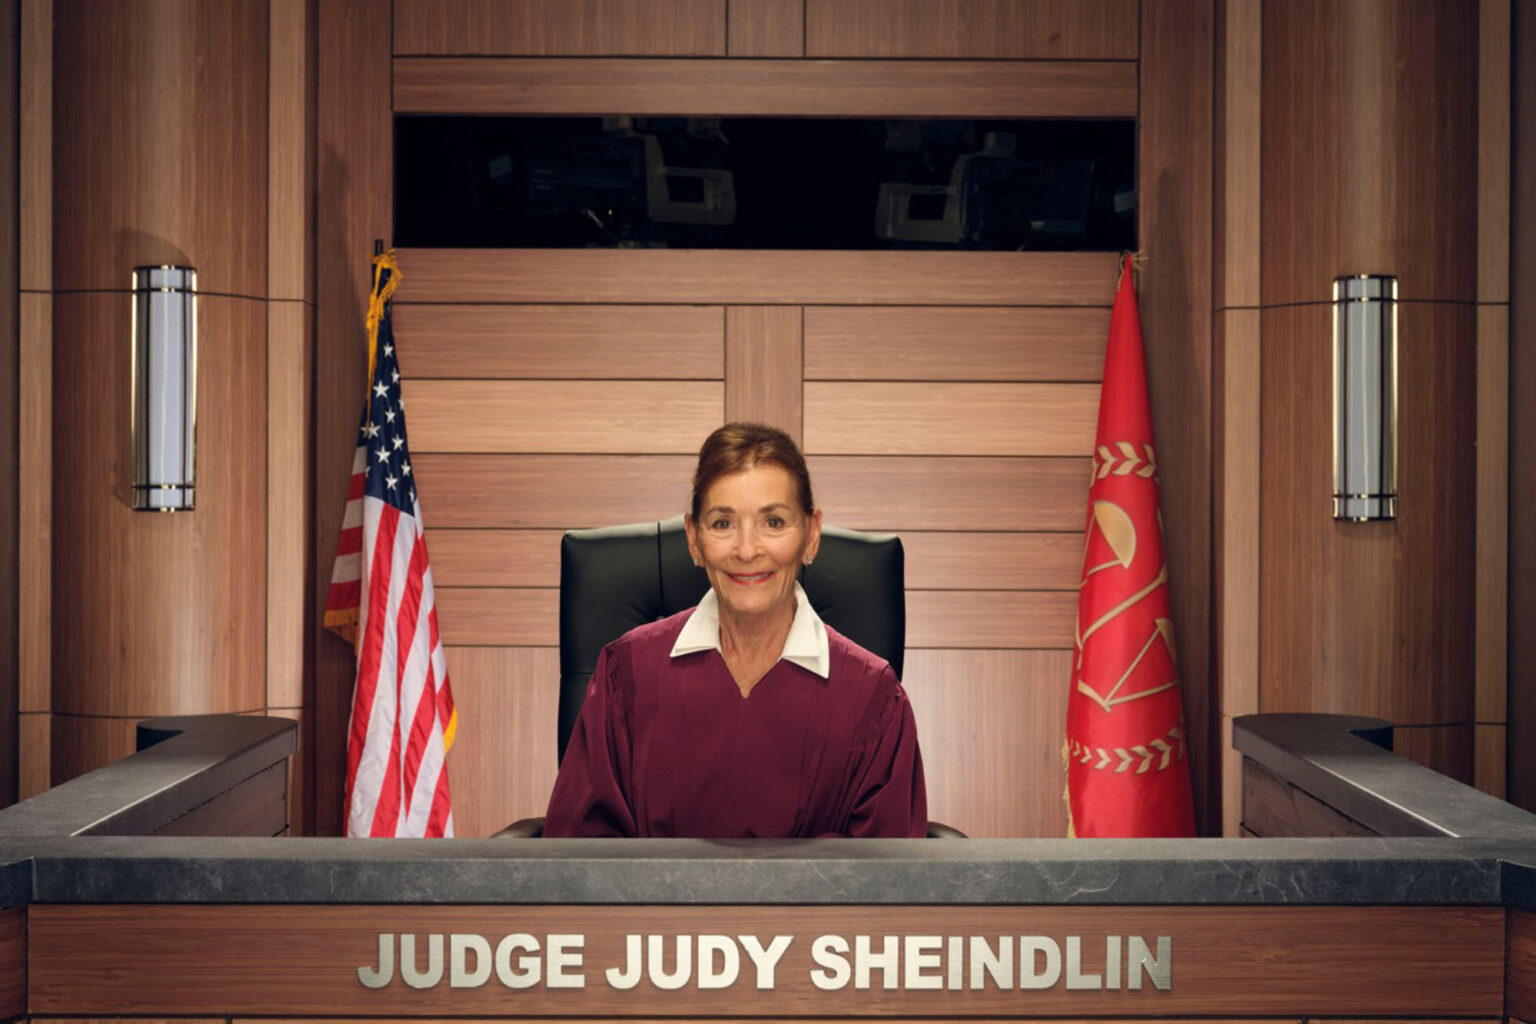 Producer/director Randy Douthit’s 'Judy Justice' has been picked up for a second season at IMDb TV. The initial episodes captured 25 million viewing hours.